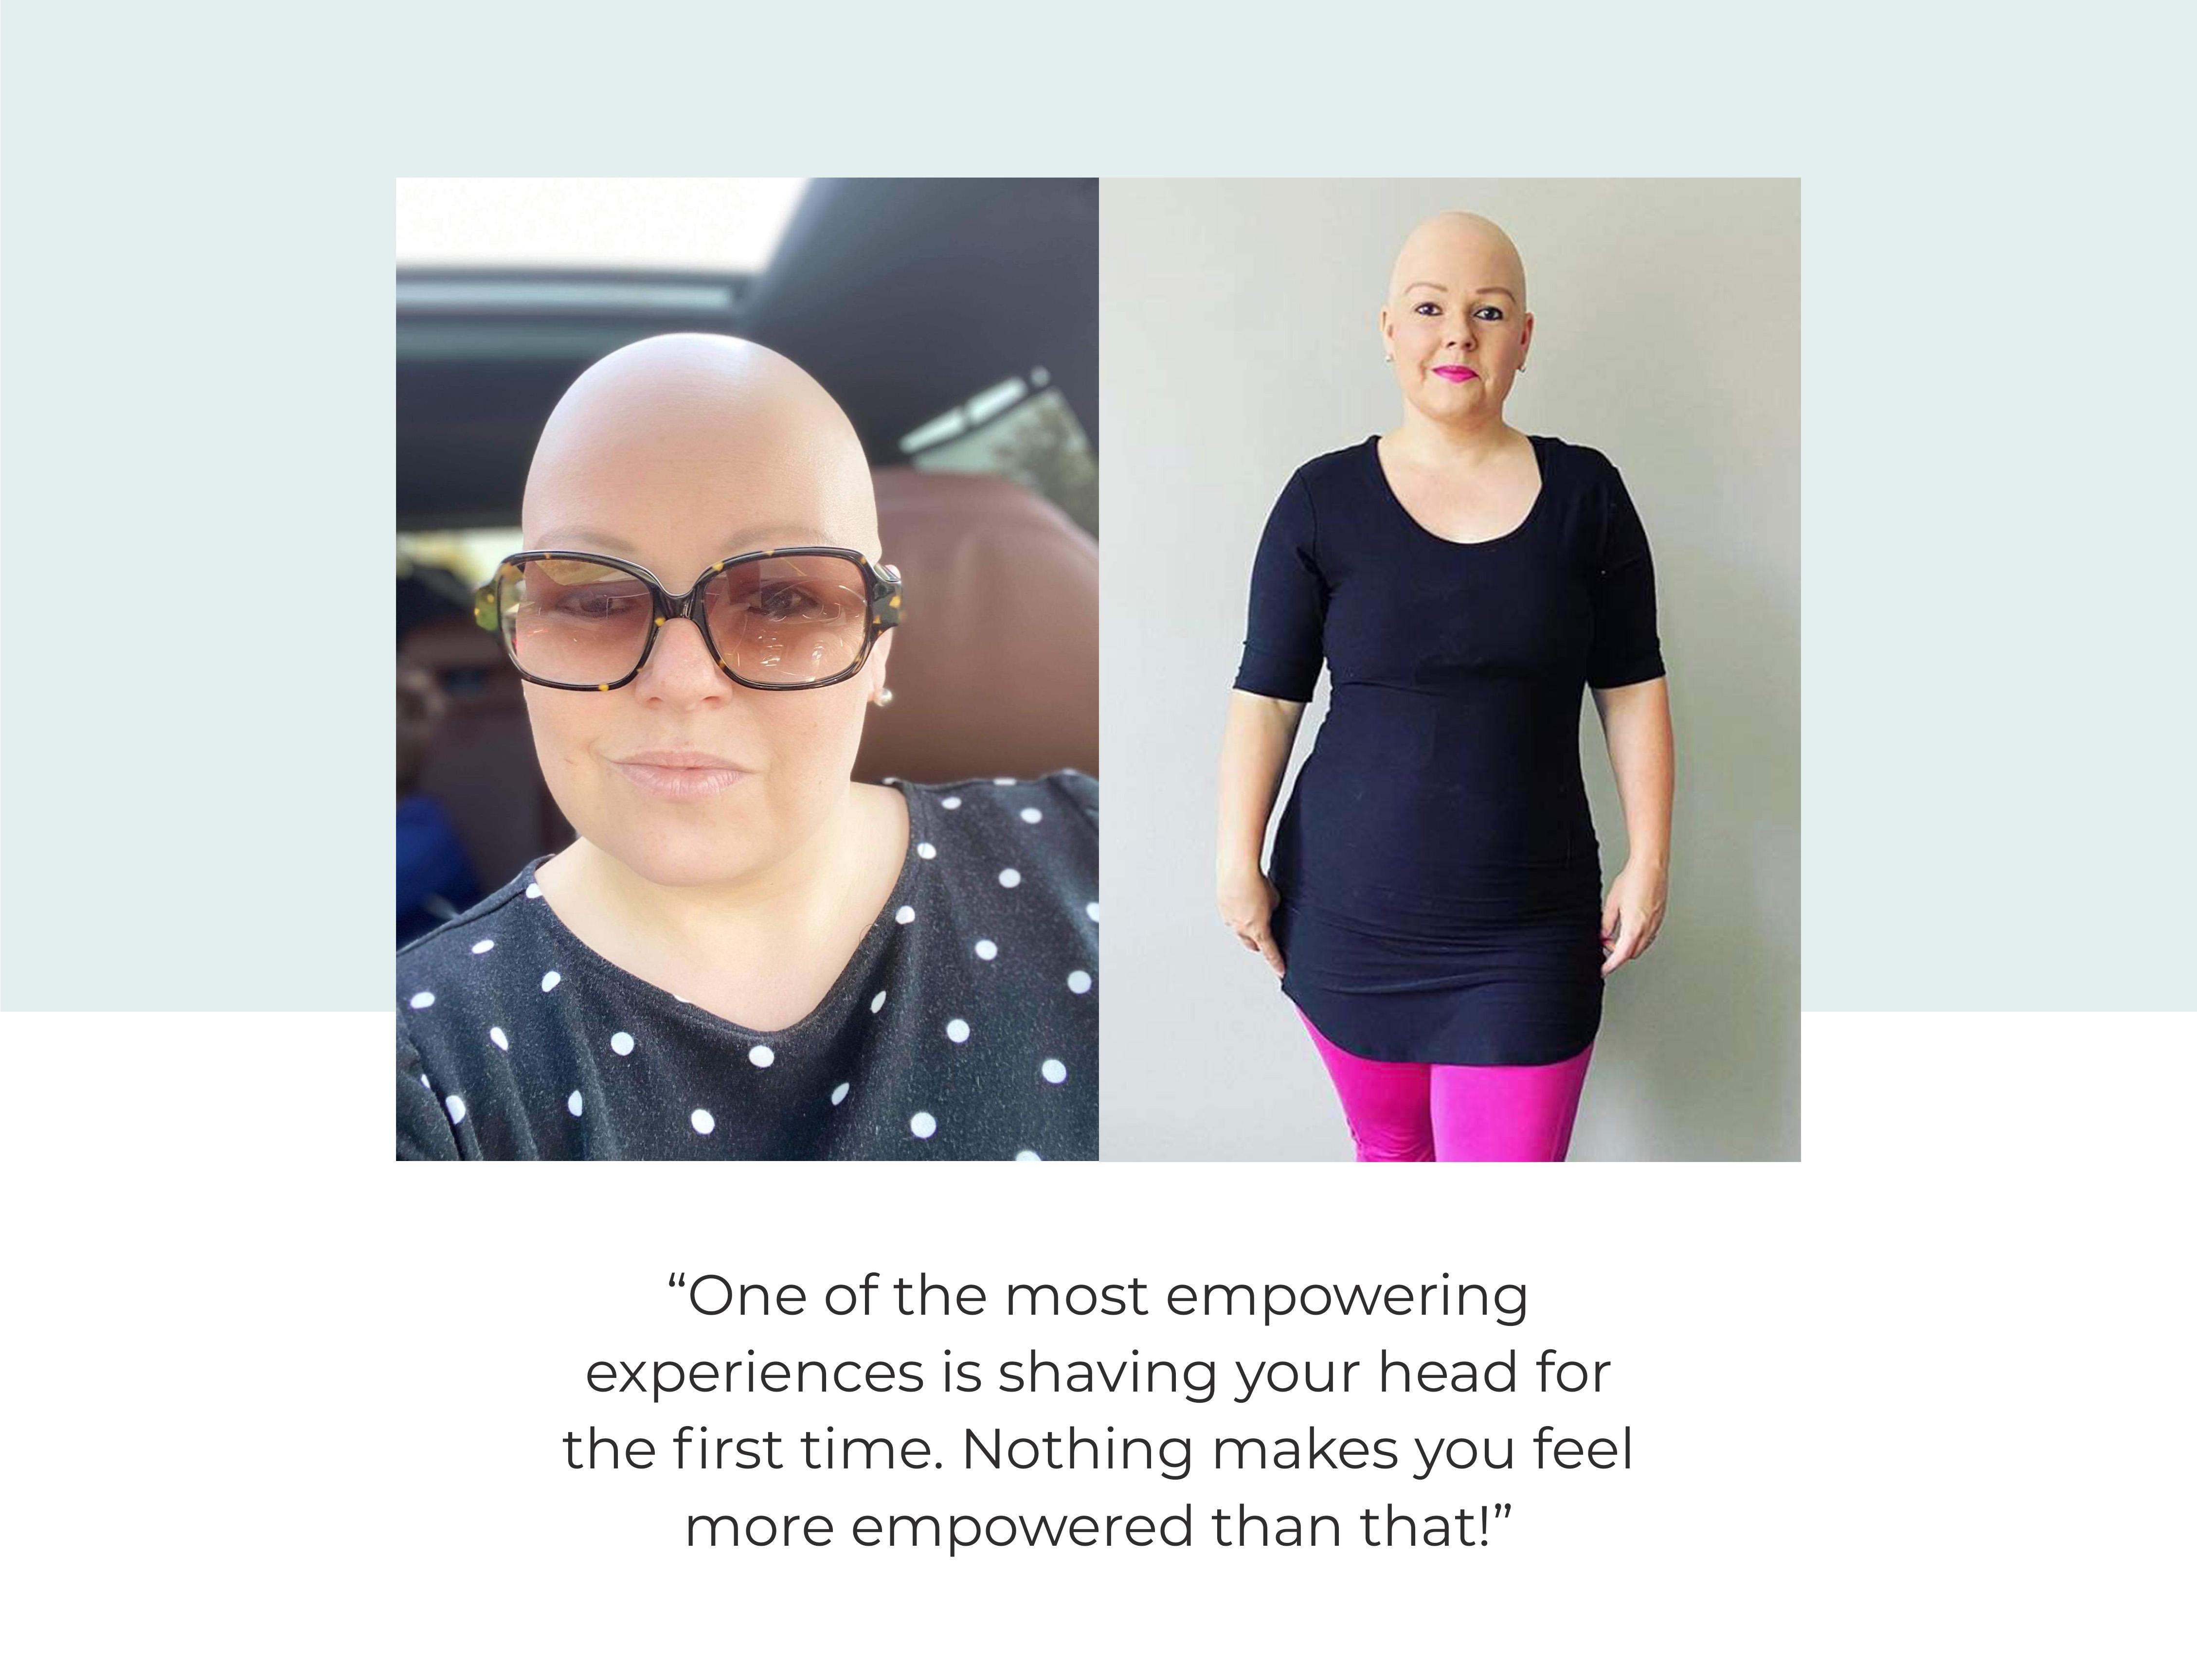 "One of the most empowering experiences is shaving your head for the first time. Nothing makes you feel more empowered than that!" - Heather, Pretty Wigs To You